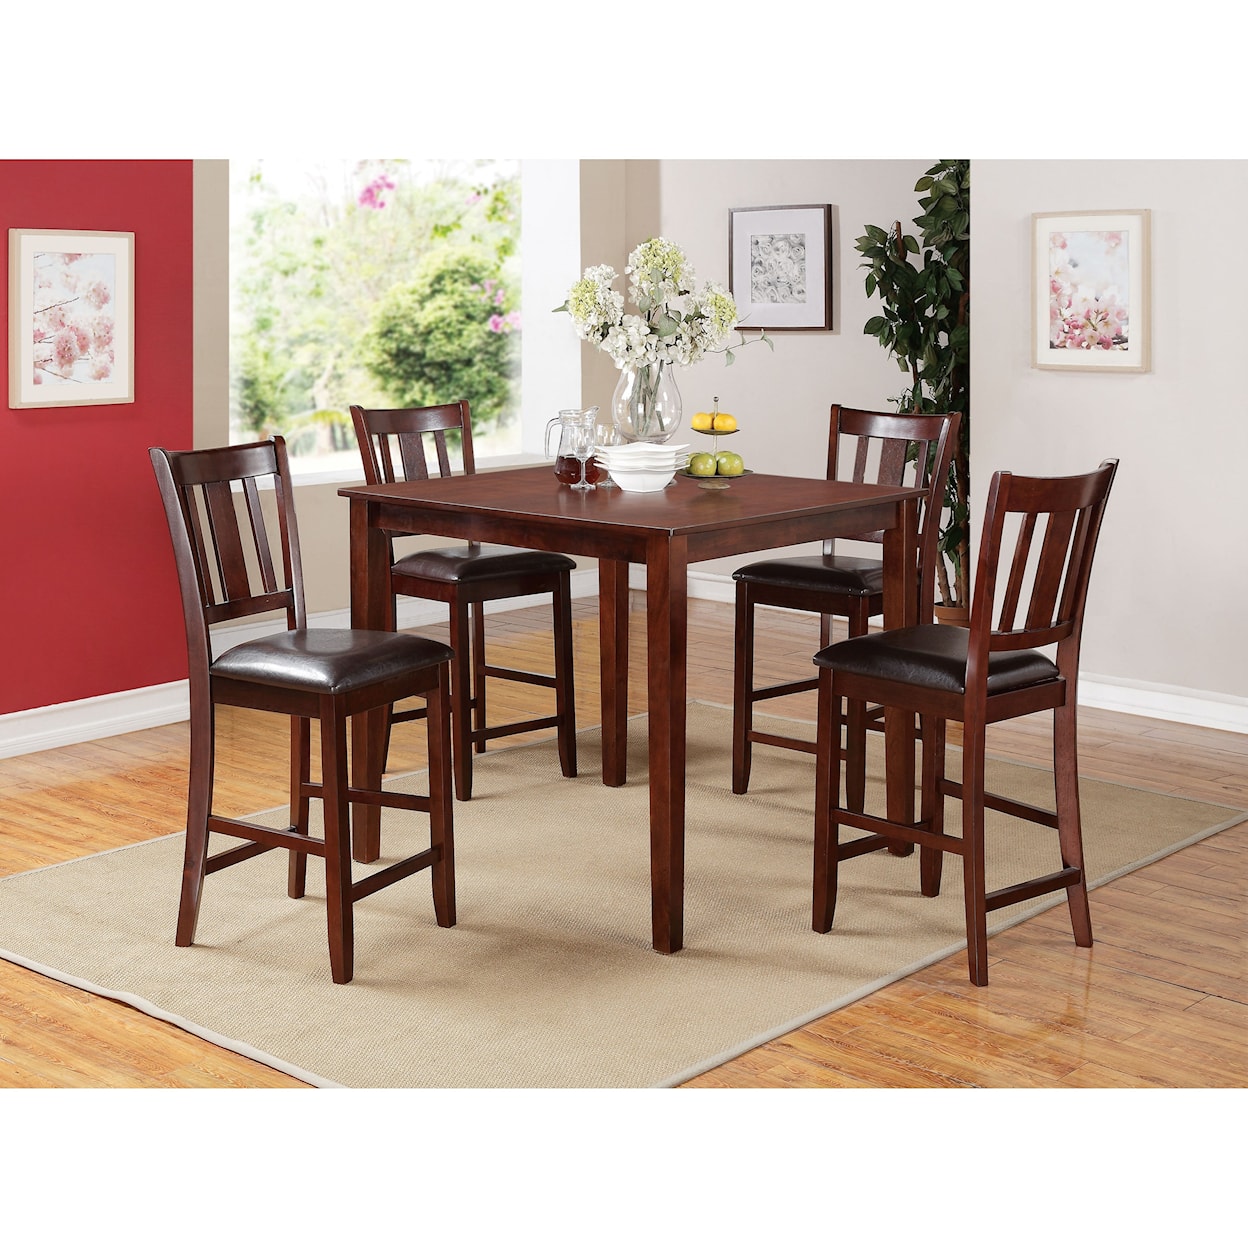 Acme Furniture Odran Counter Height Dining Set with 4 Chairs